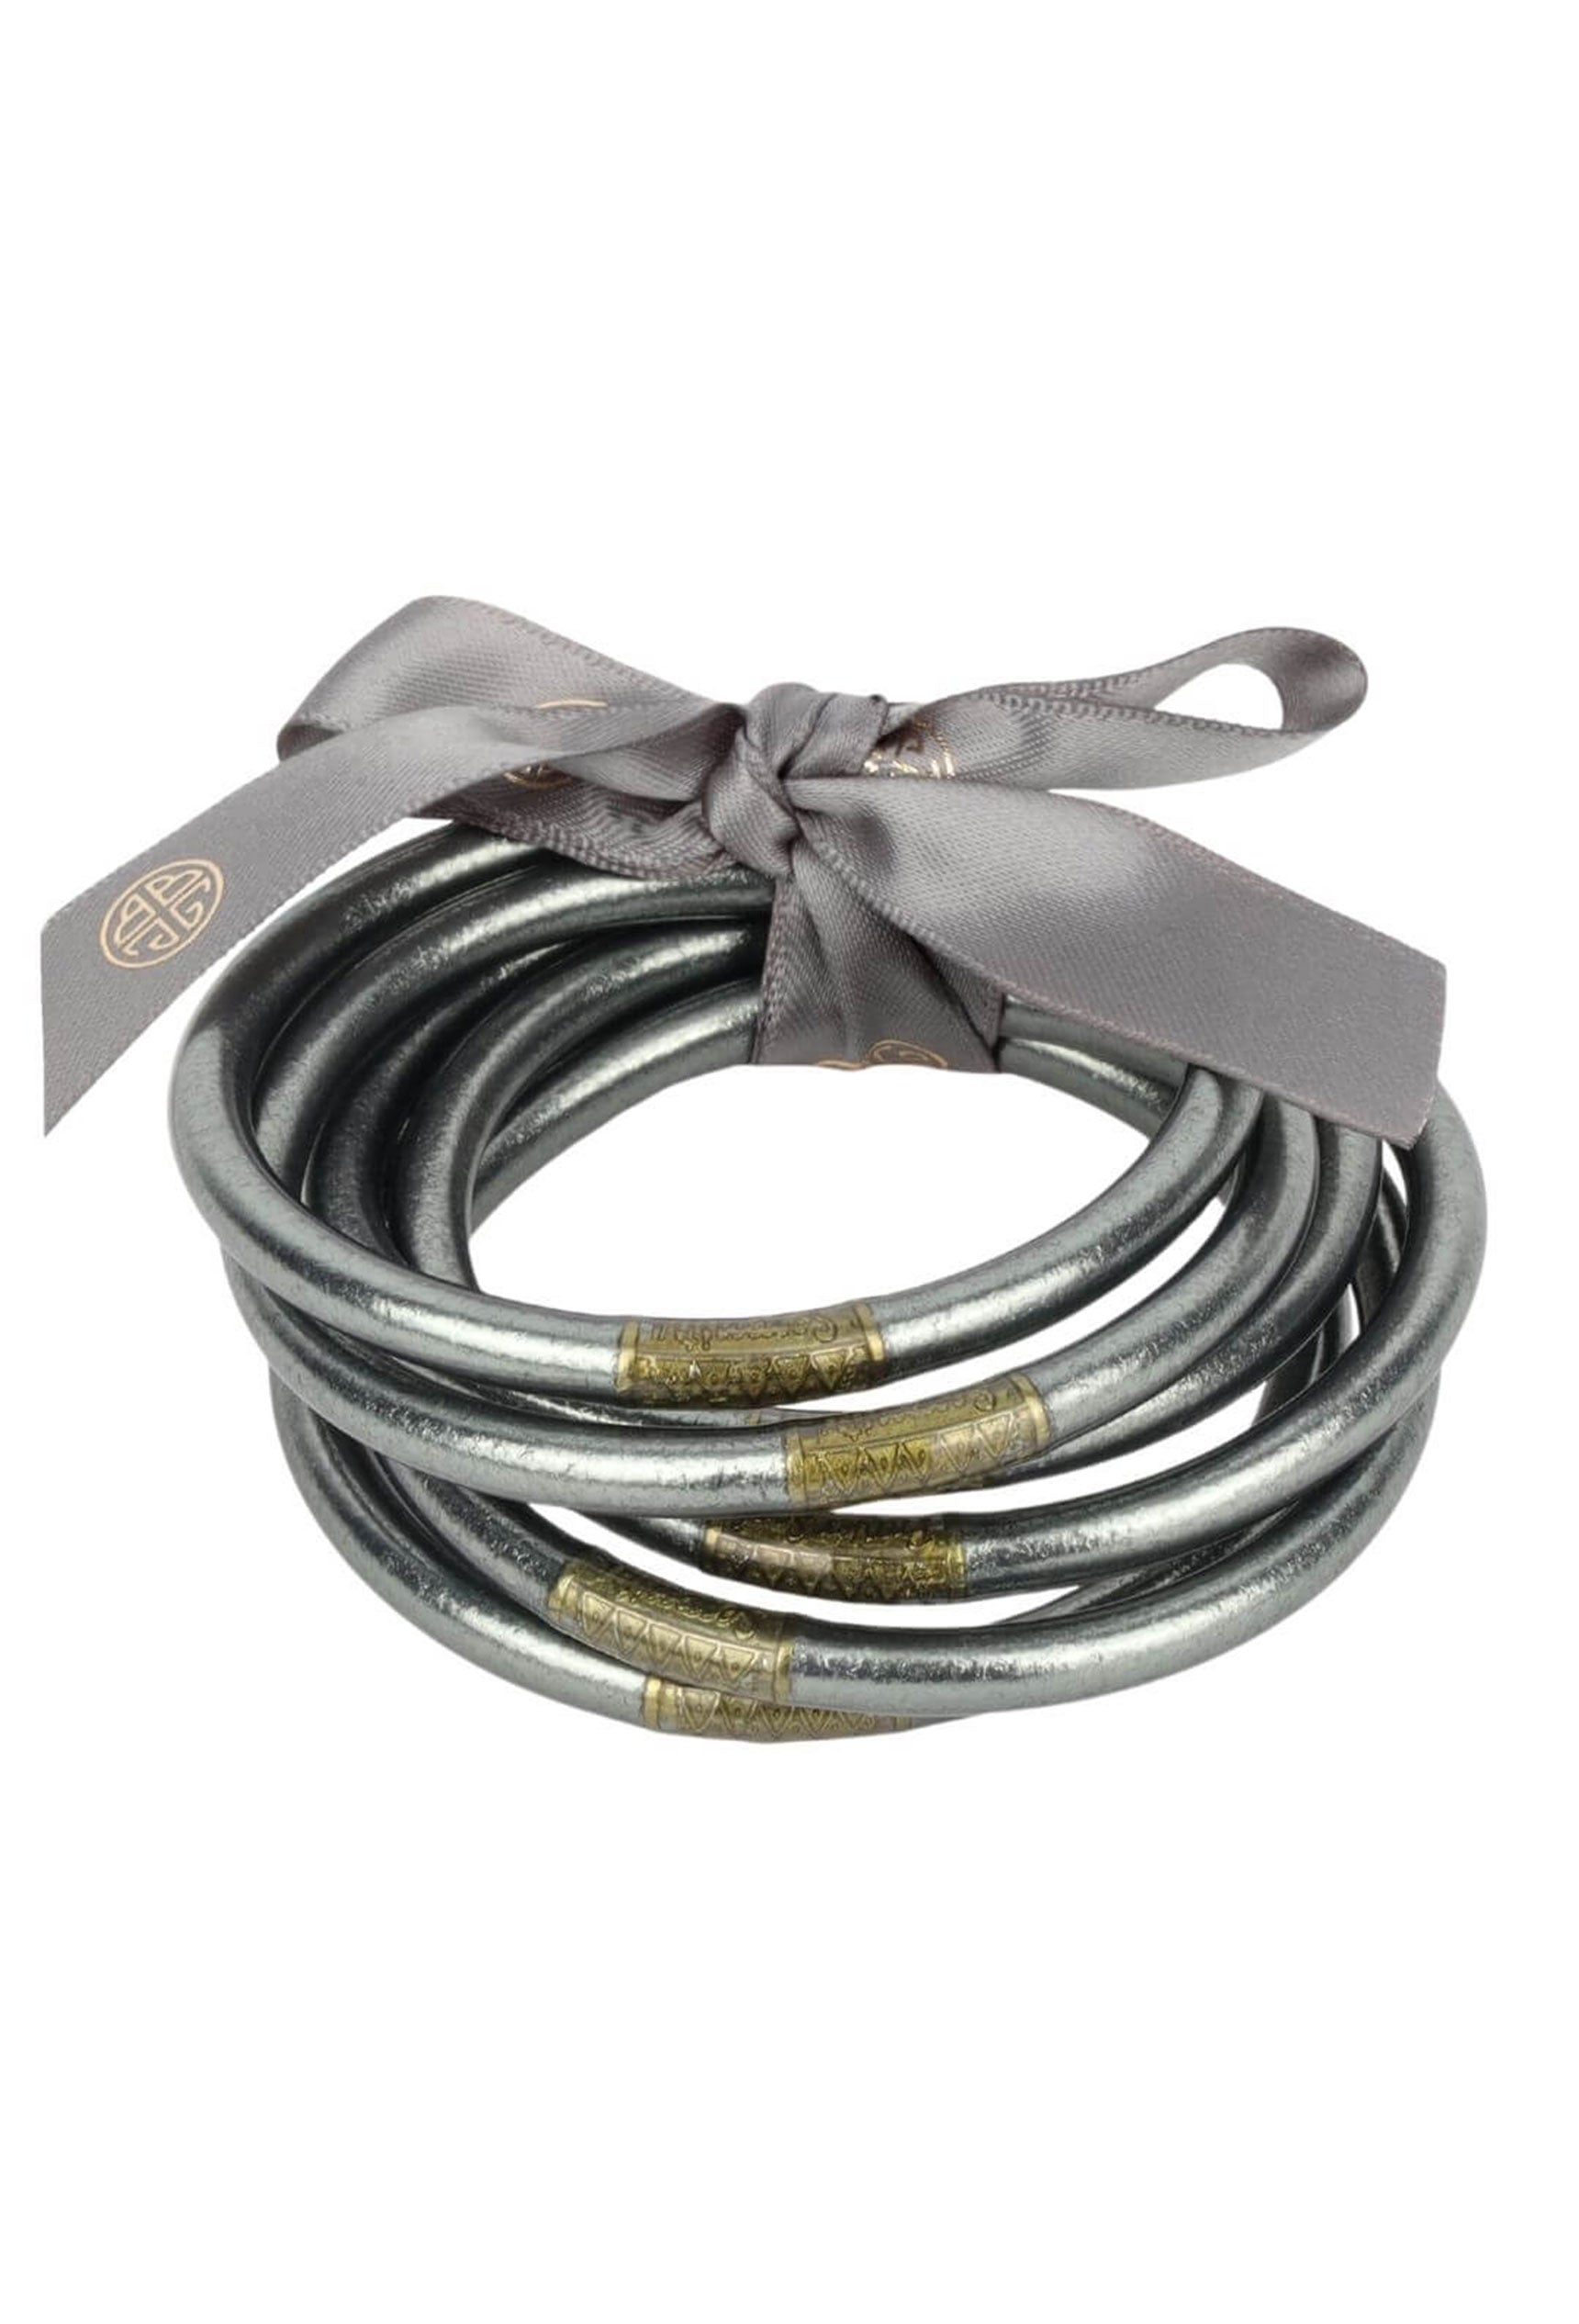 BUDHAGIRL AWB in Graphite, set of 6 bangles with a grey sparkly tone